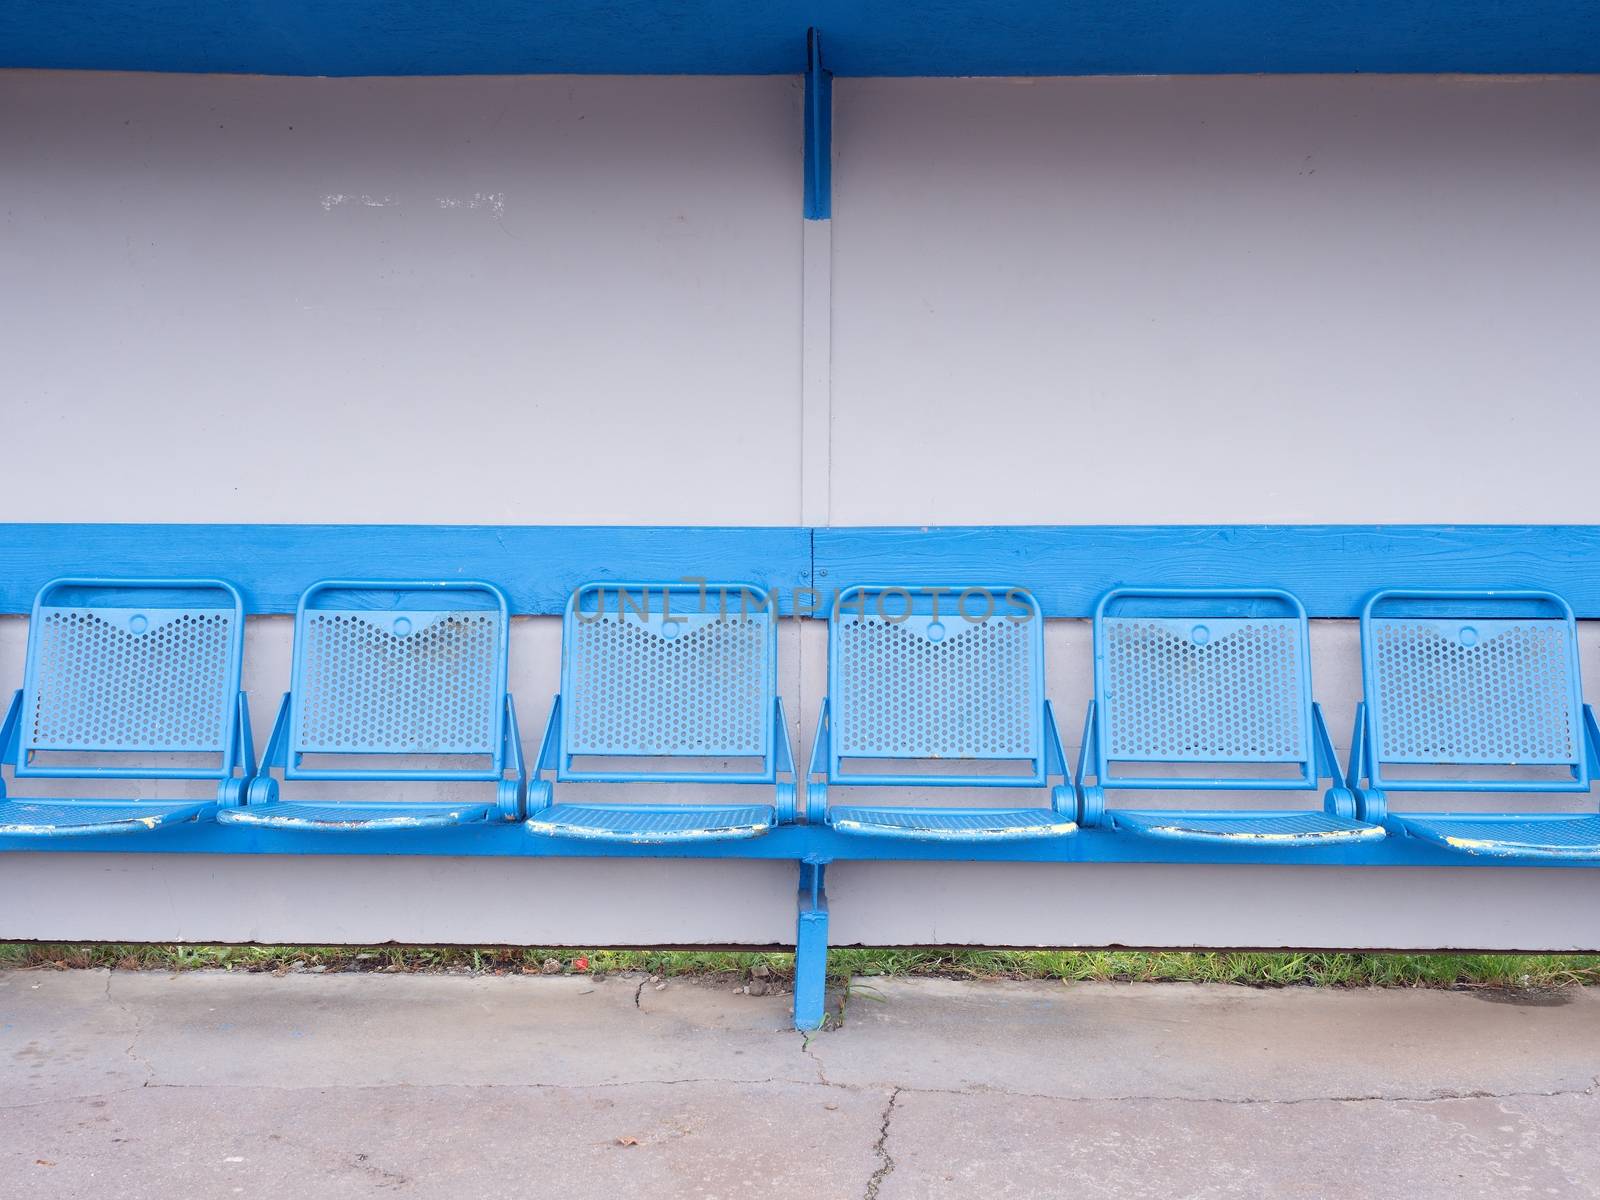 New blue metal seats on outdoor stadium players bench, chairs with blue paint below wooden roof. 